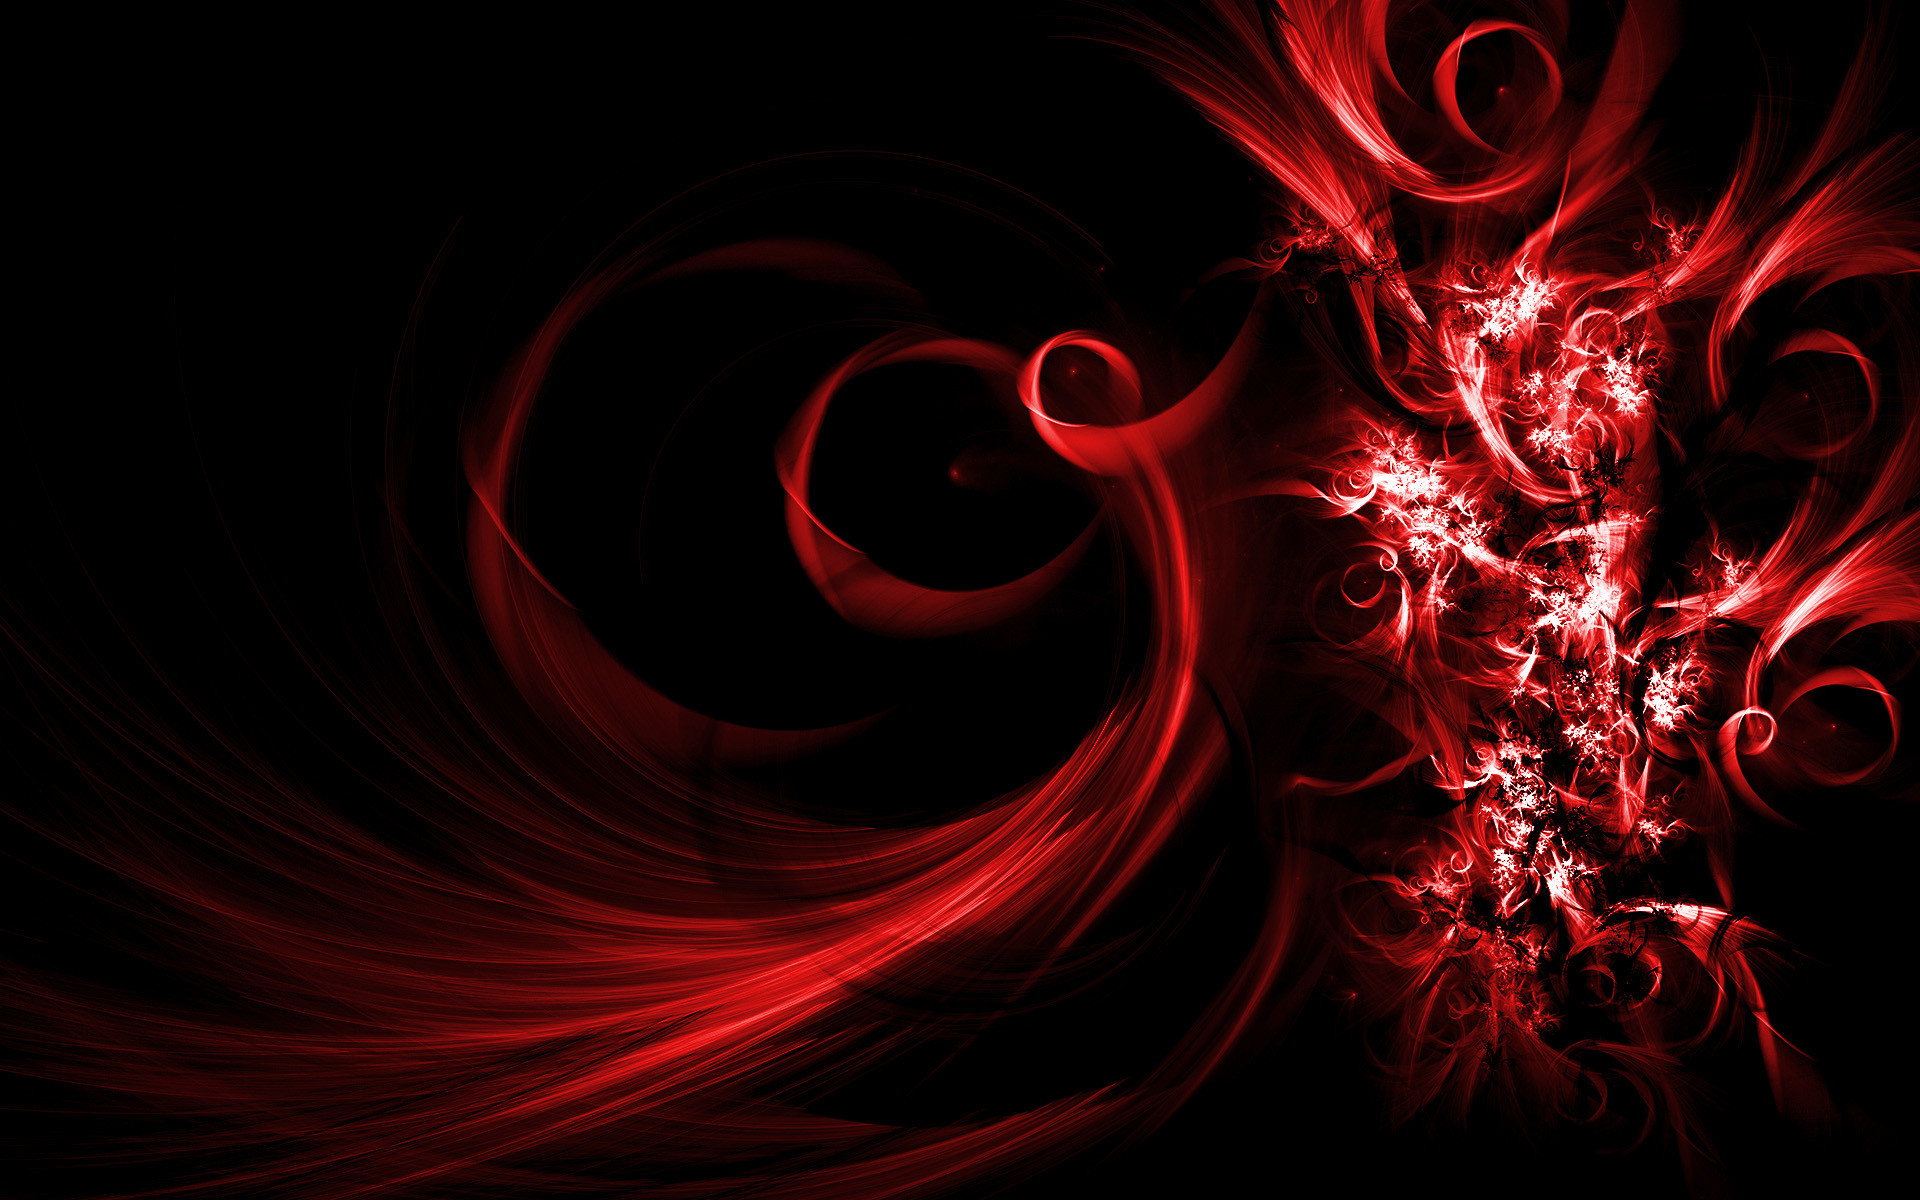 1920x1200 Pin by Irina Voloshina on Black&Red. | Pinterest | Wallpaper backgrounds  and Wallpaper